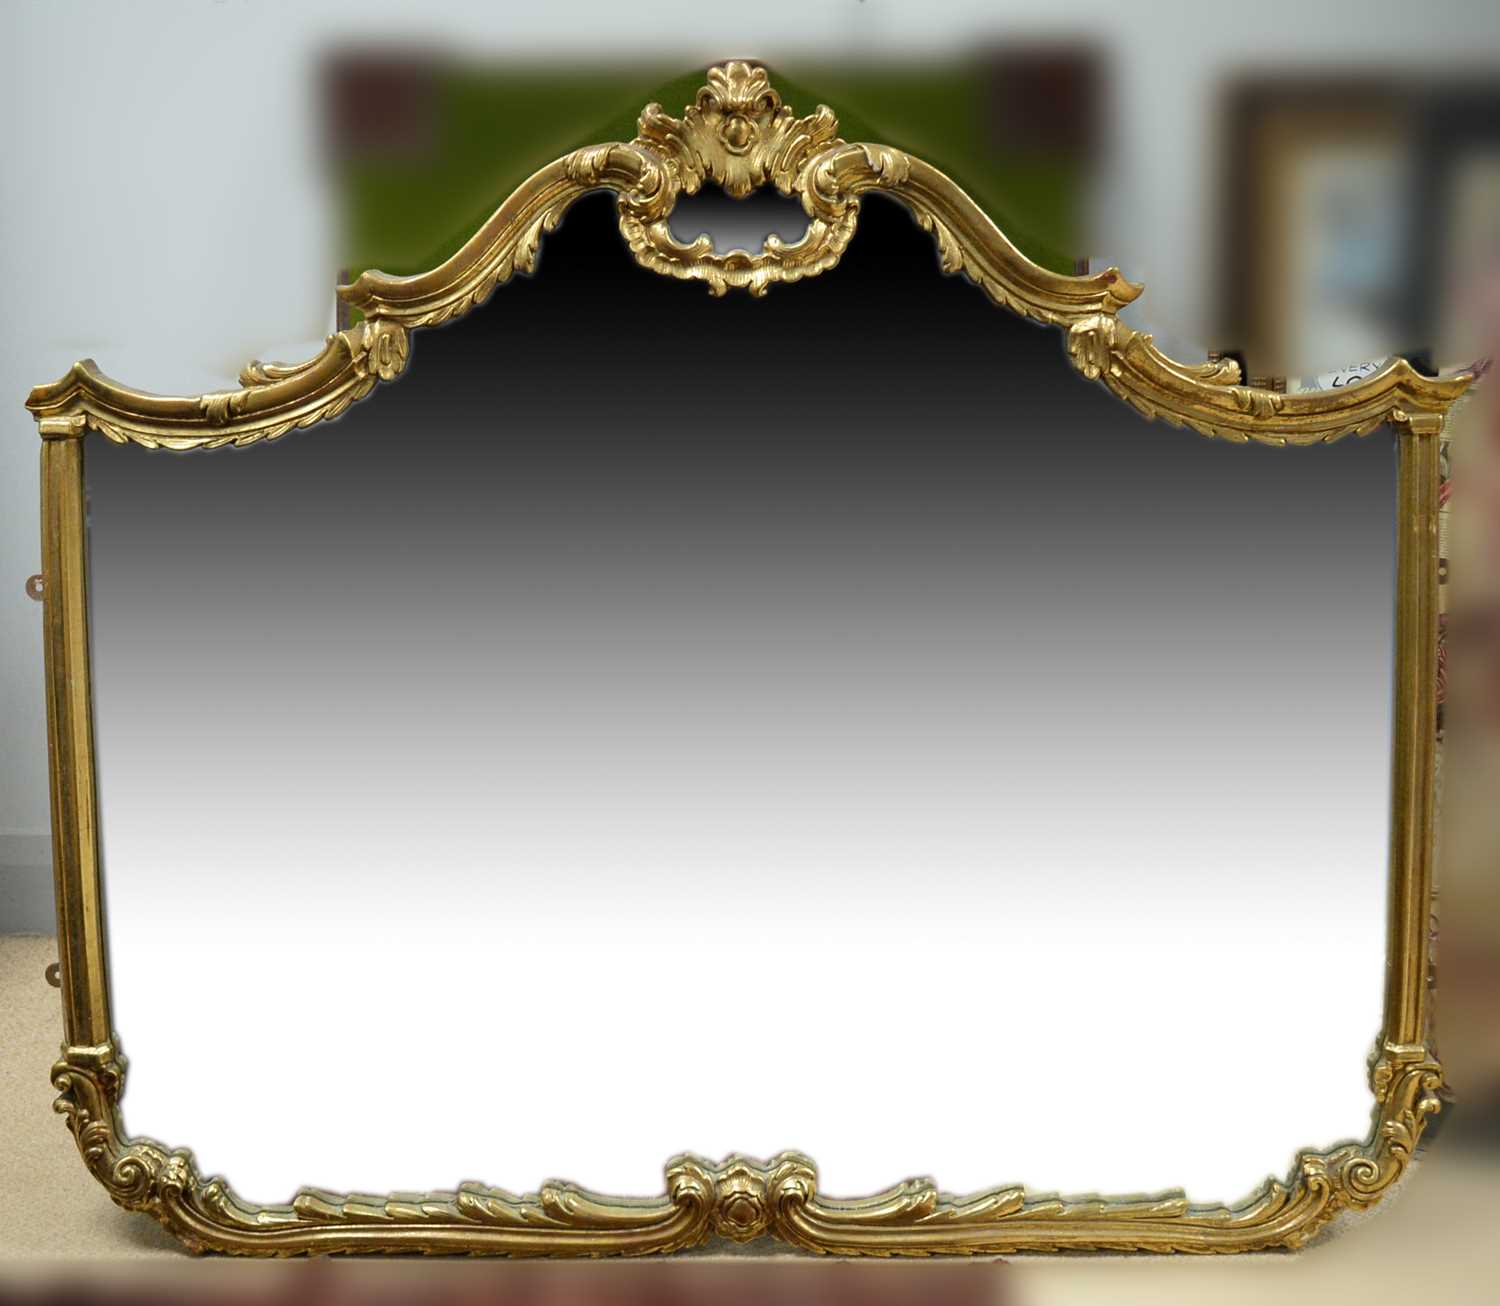 Lot 257 - An ornate gold painted mirror